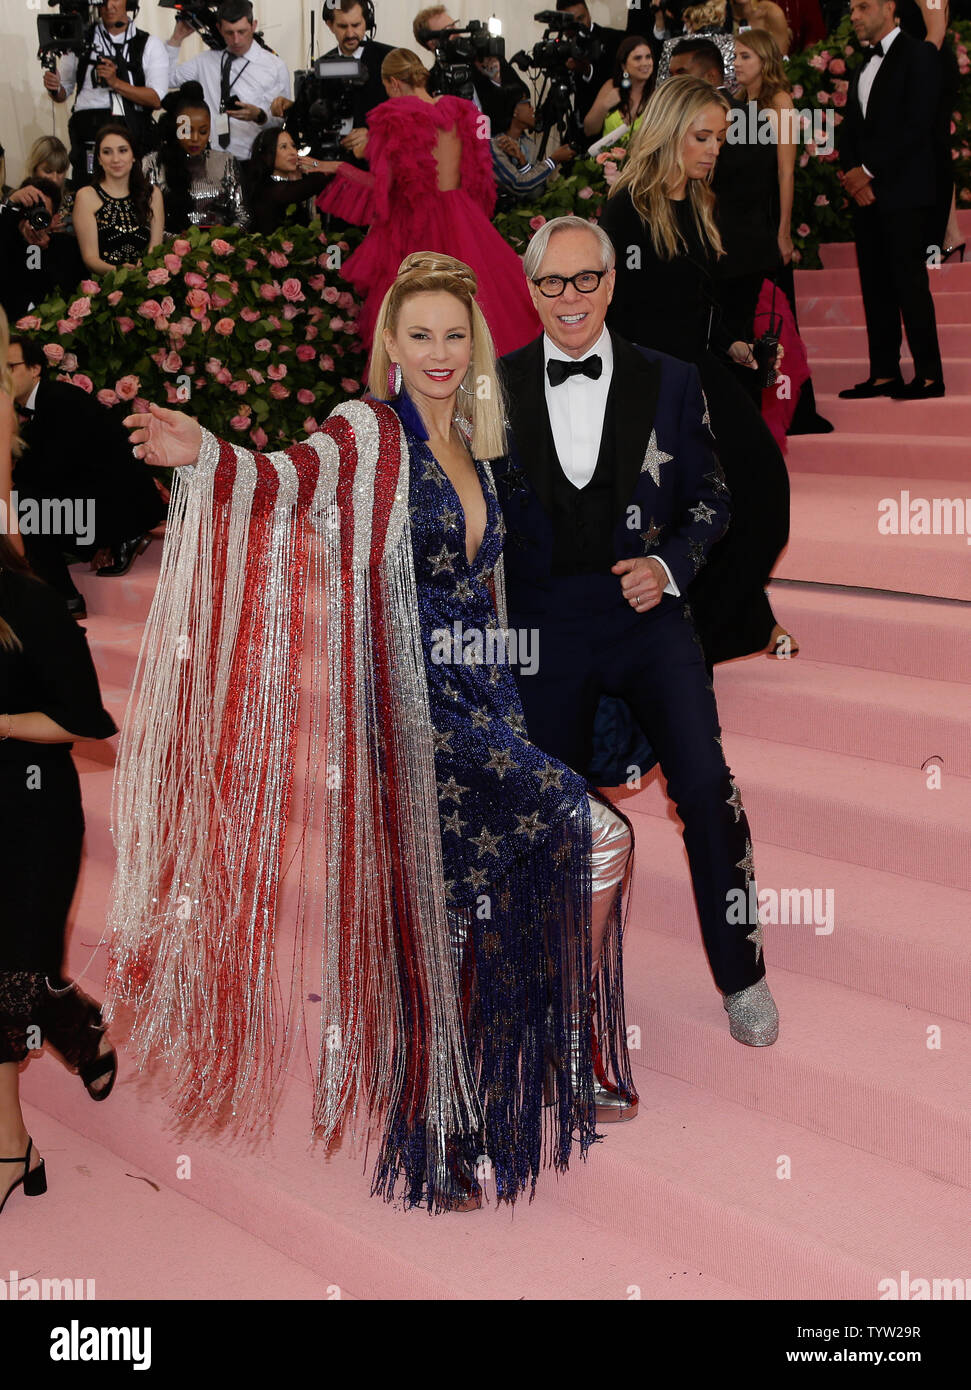 Tommy Hilfiger, Dee Hilfiger arrive on the red carpet at The Metropolitan  Museum of Art's Costume